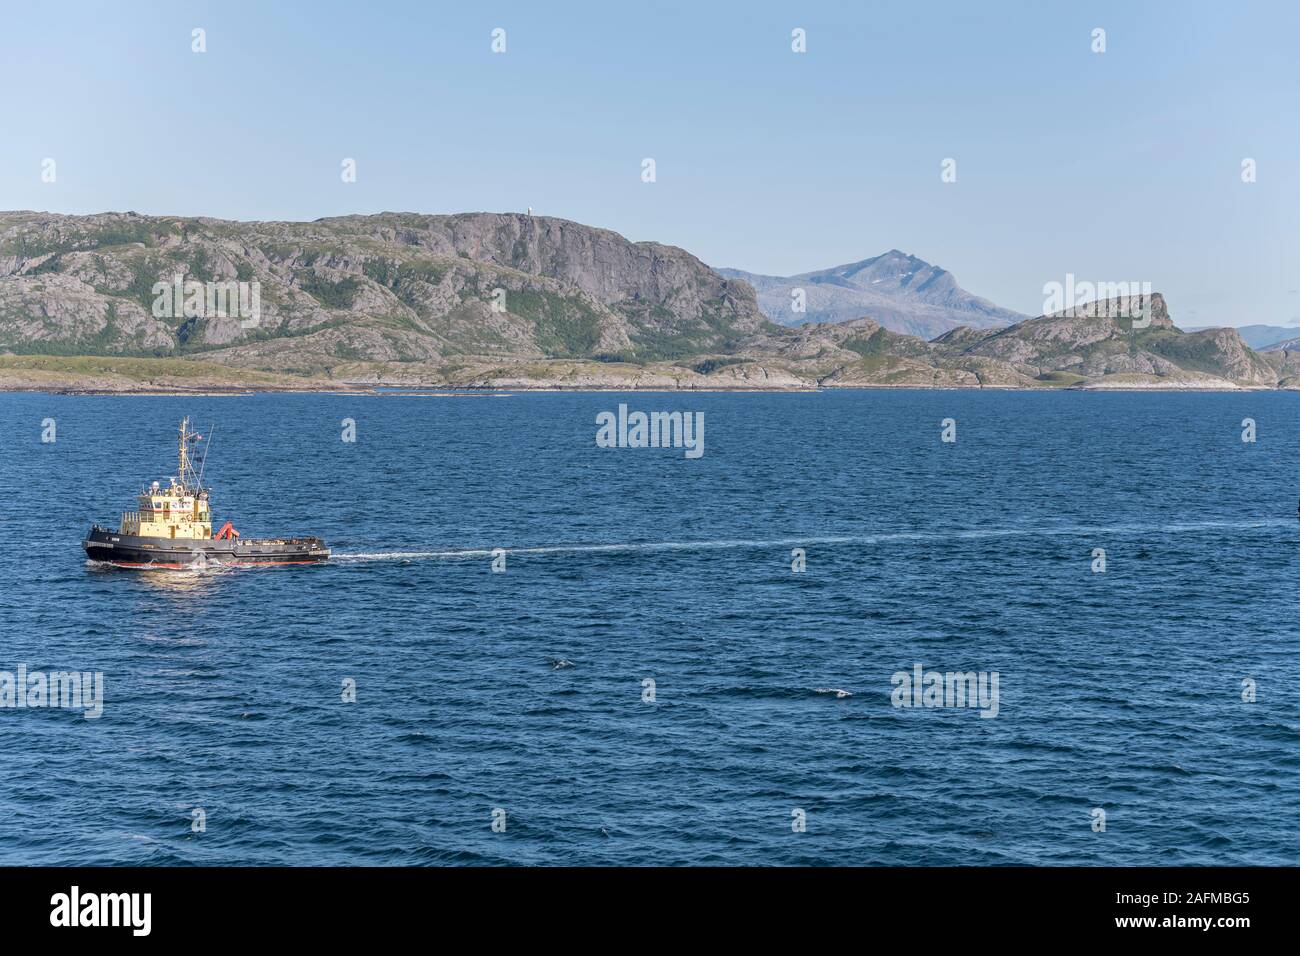 near VAGOYA, NORWAY - July 17 2019: fjord landscape with tugboat towing in fjord waters, shot under bright summer light on july 17, 2019 near Vagoya i Stock Photo